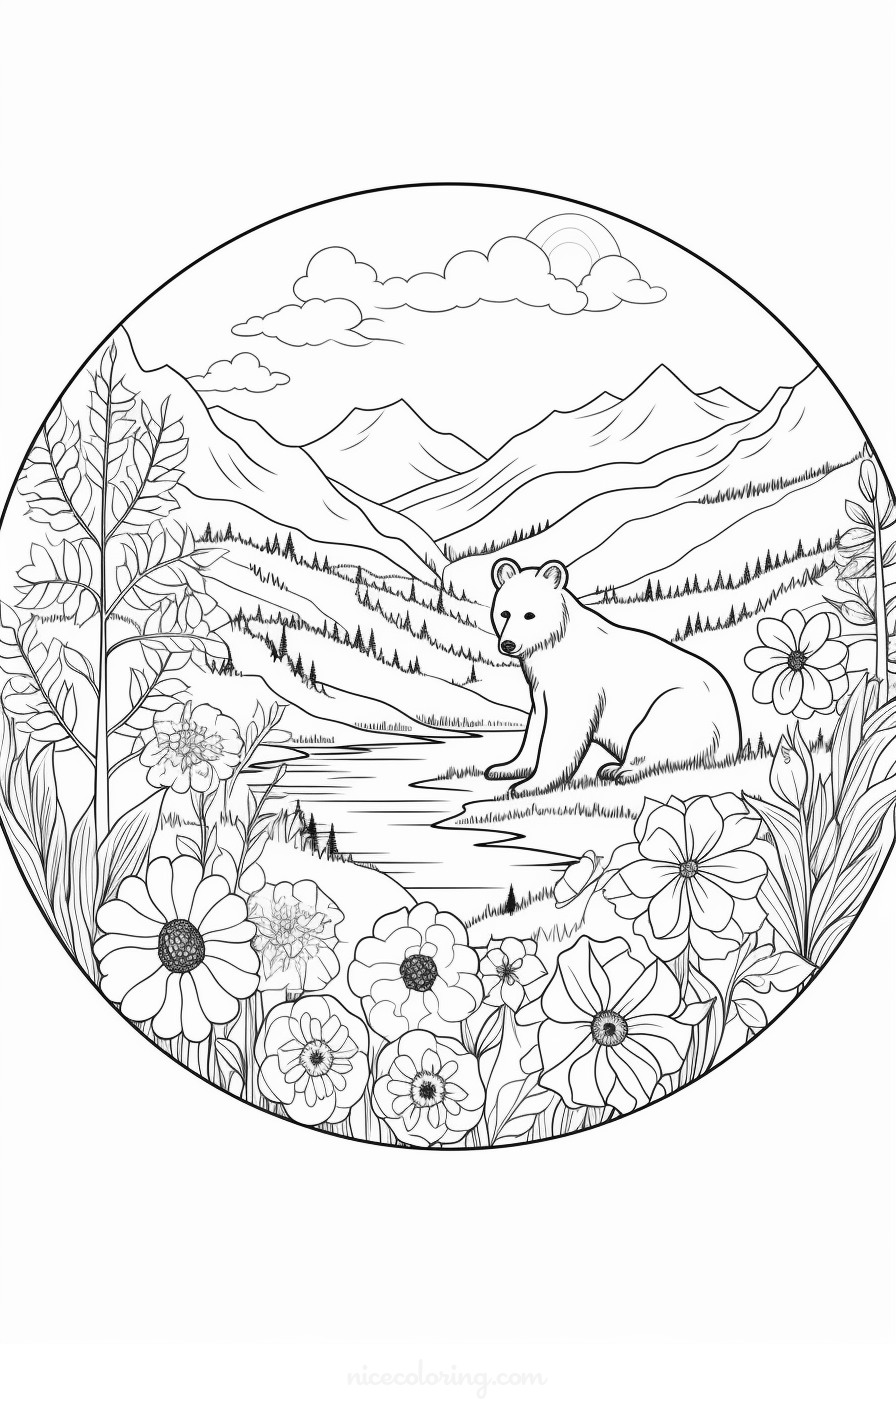 Bear family in forest scene coloring page